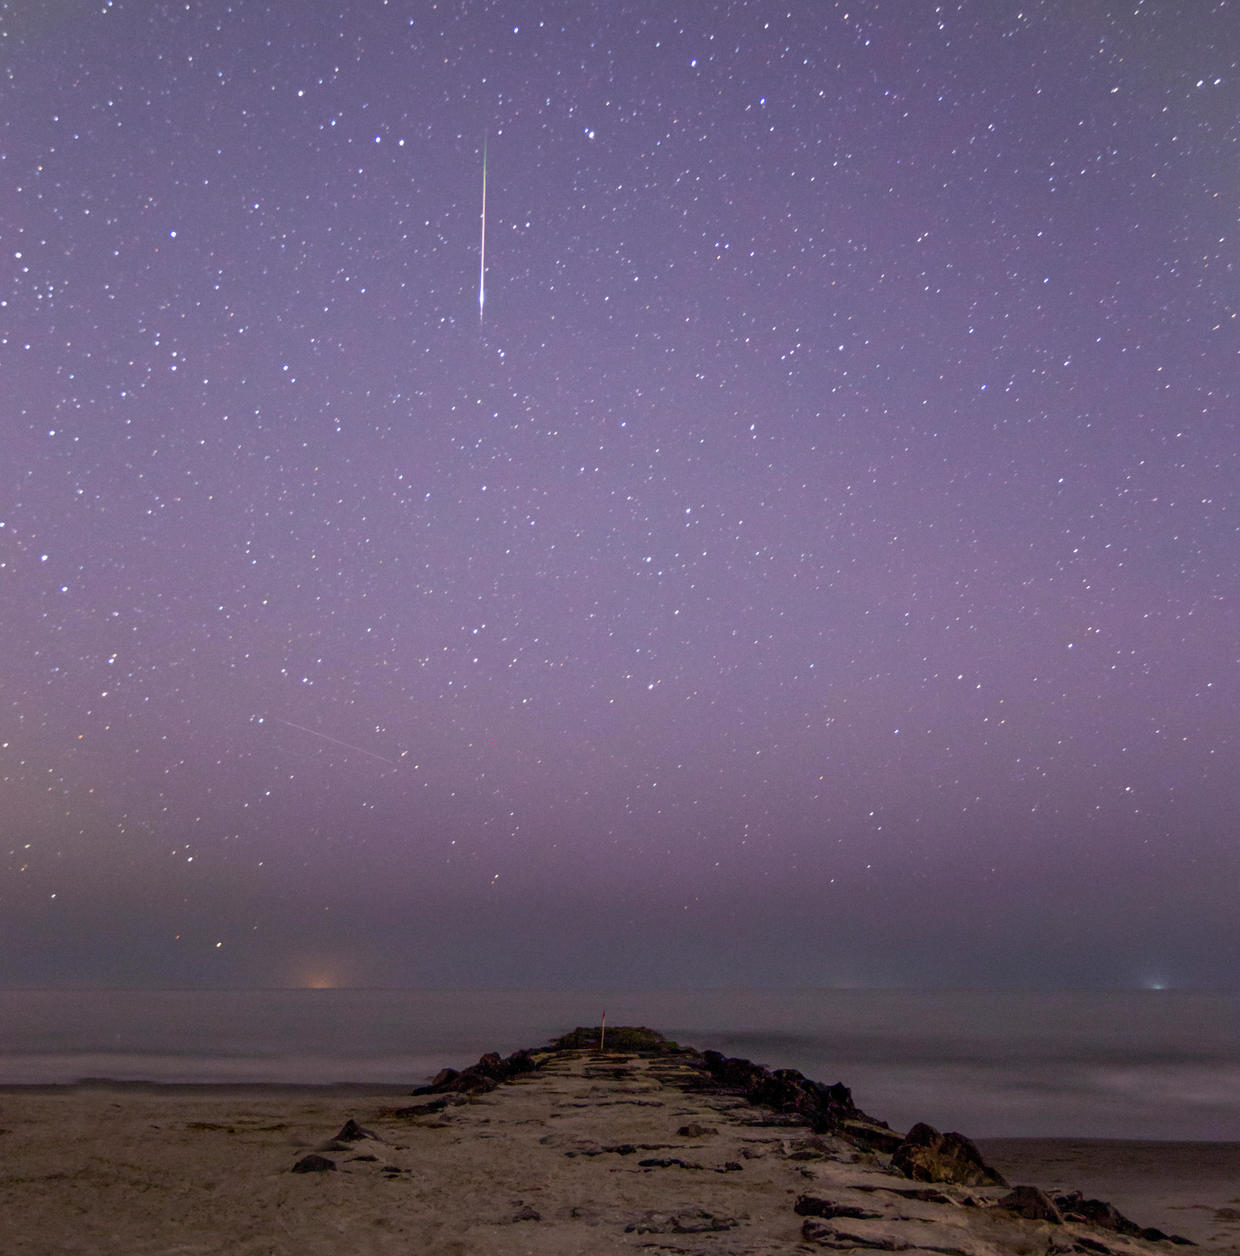 Perseids meteor shower When, how and where to watch the Perseid meteor